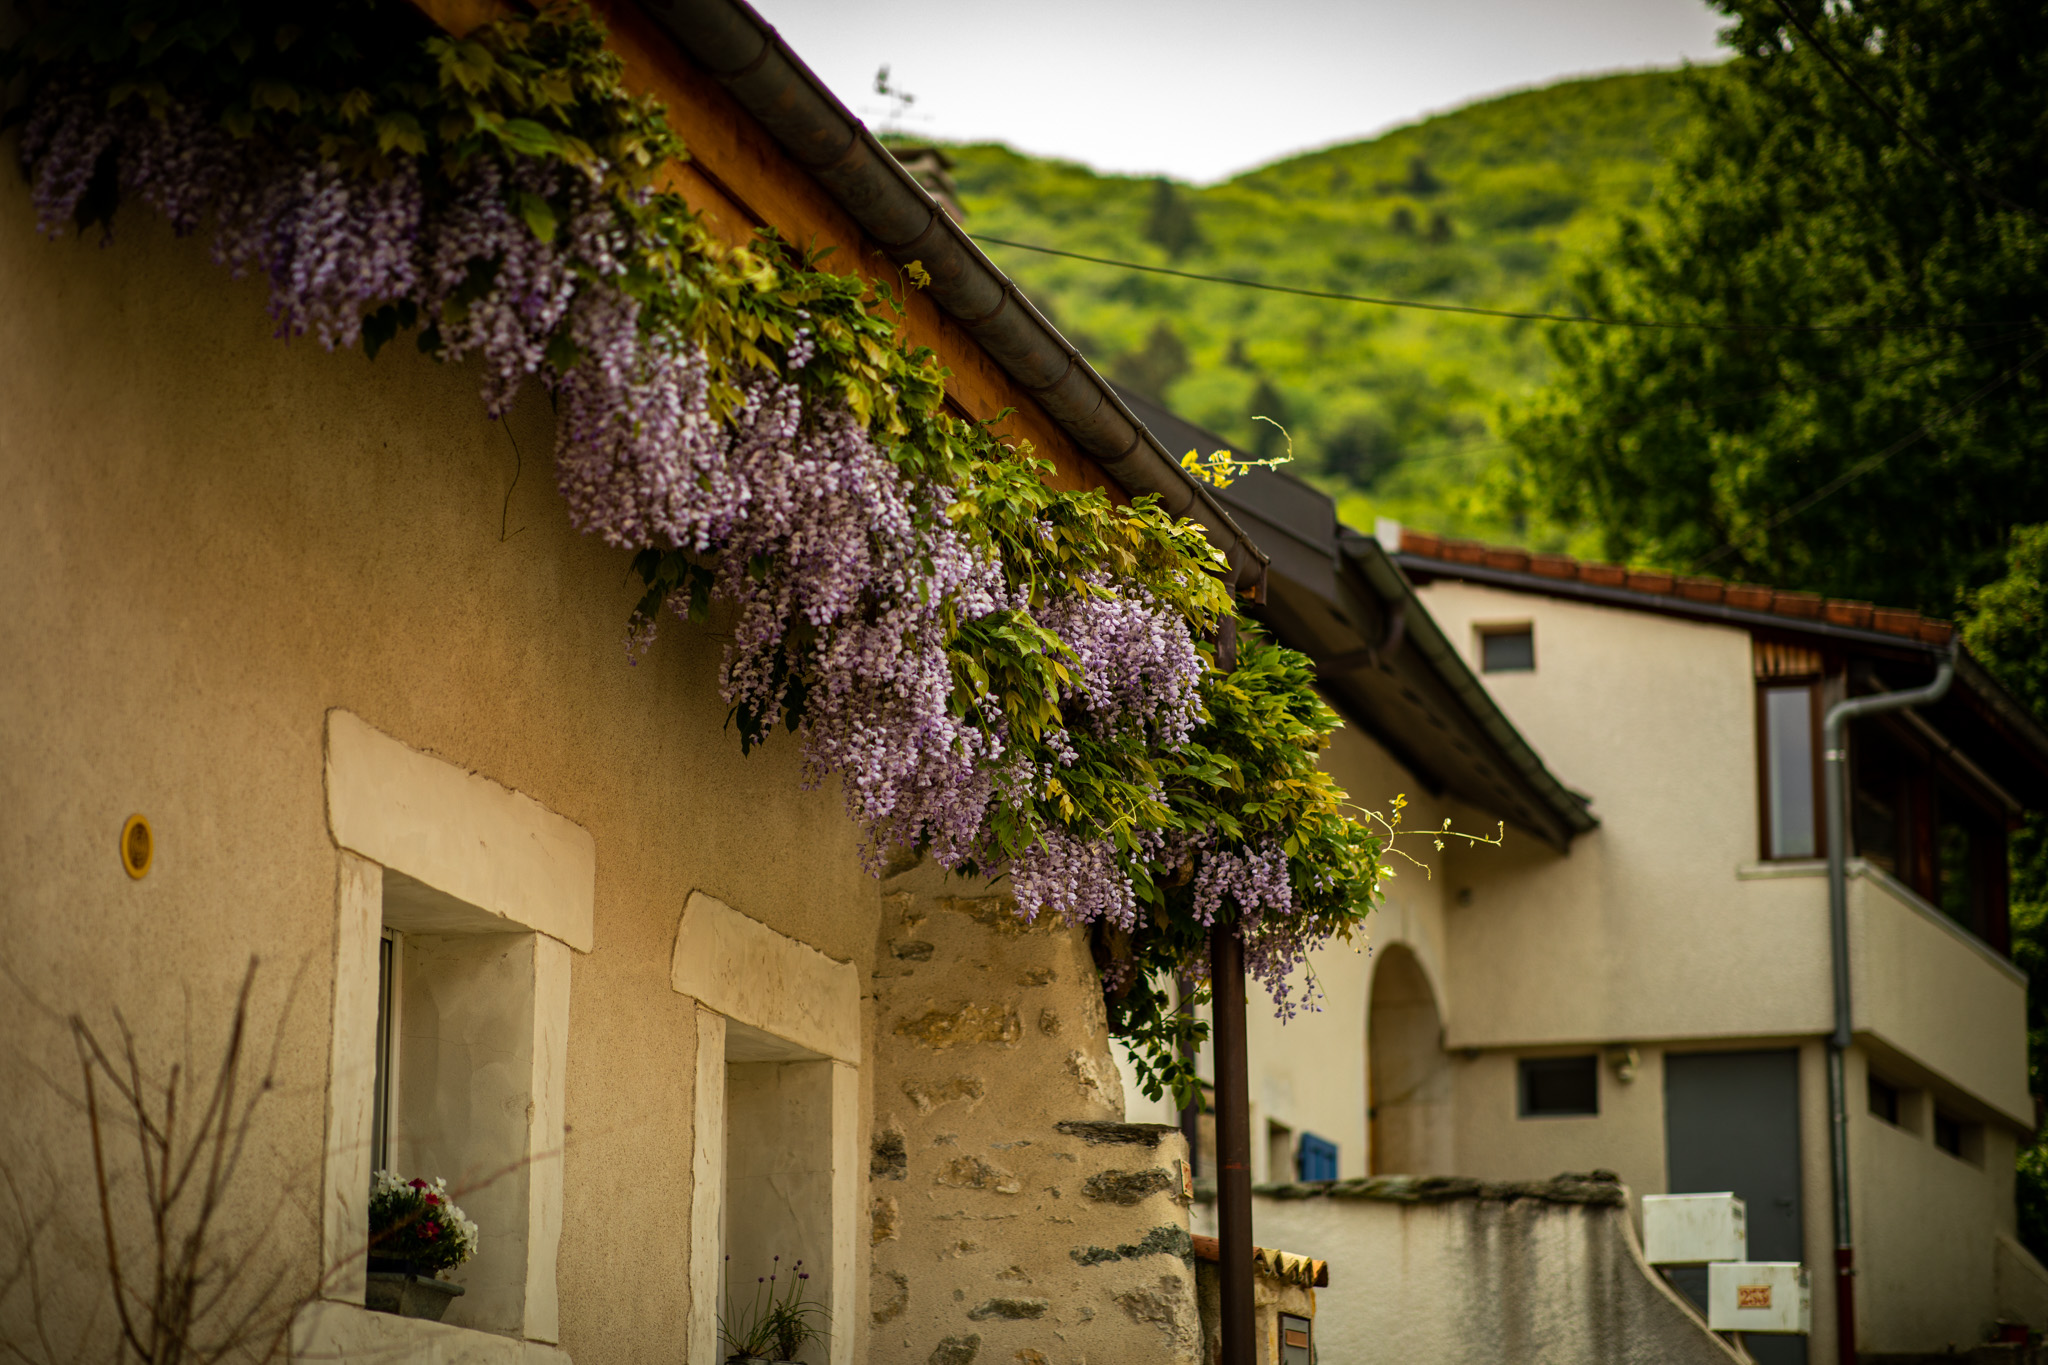 Photography Outdoors Trees Flowers Building Village Architecture 2048x1365